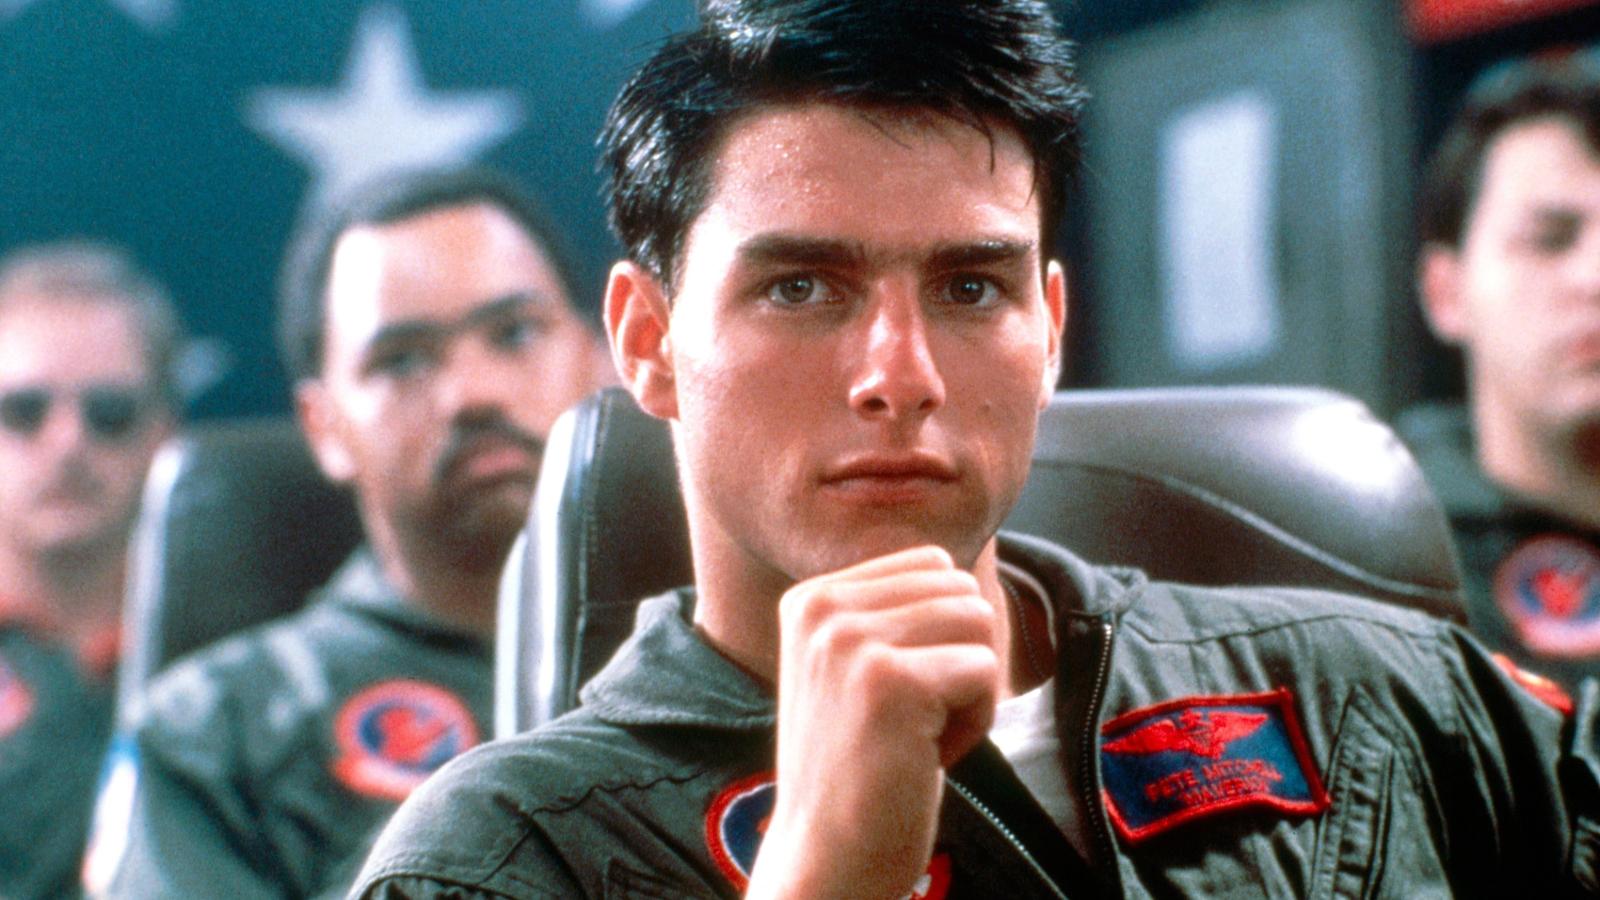 Tom Cruise as Maverick in Top Gun, sitting in a chair with his hand on his chin